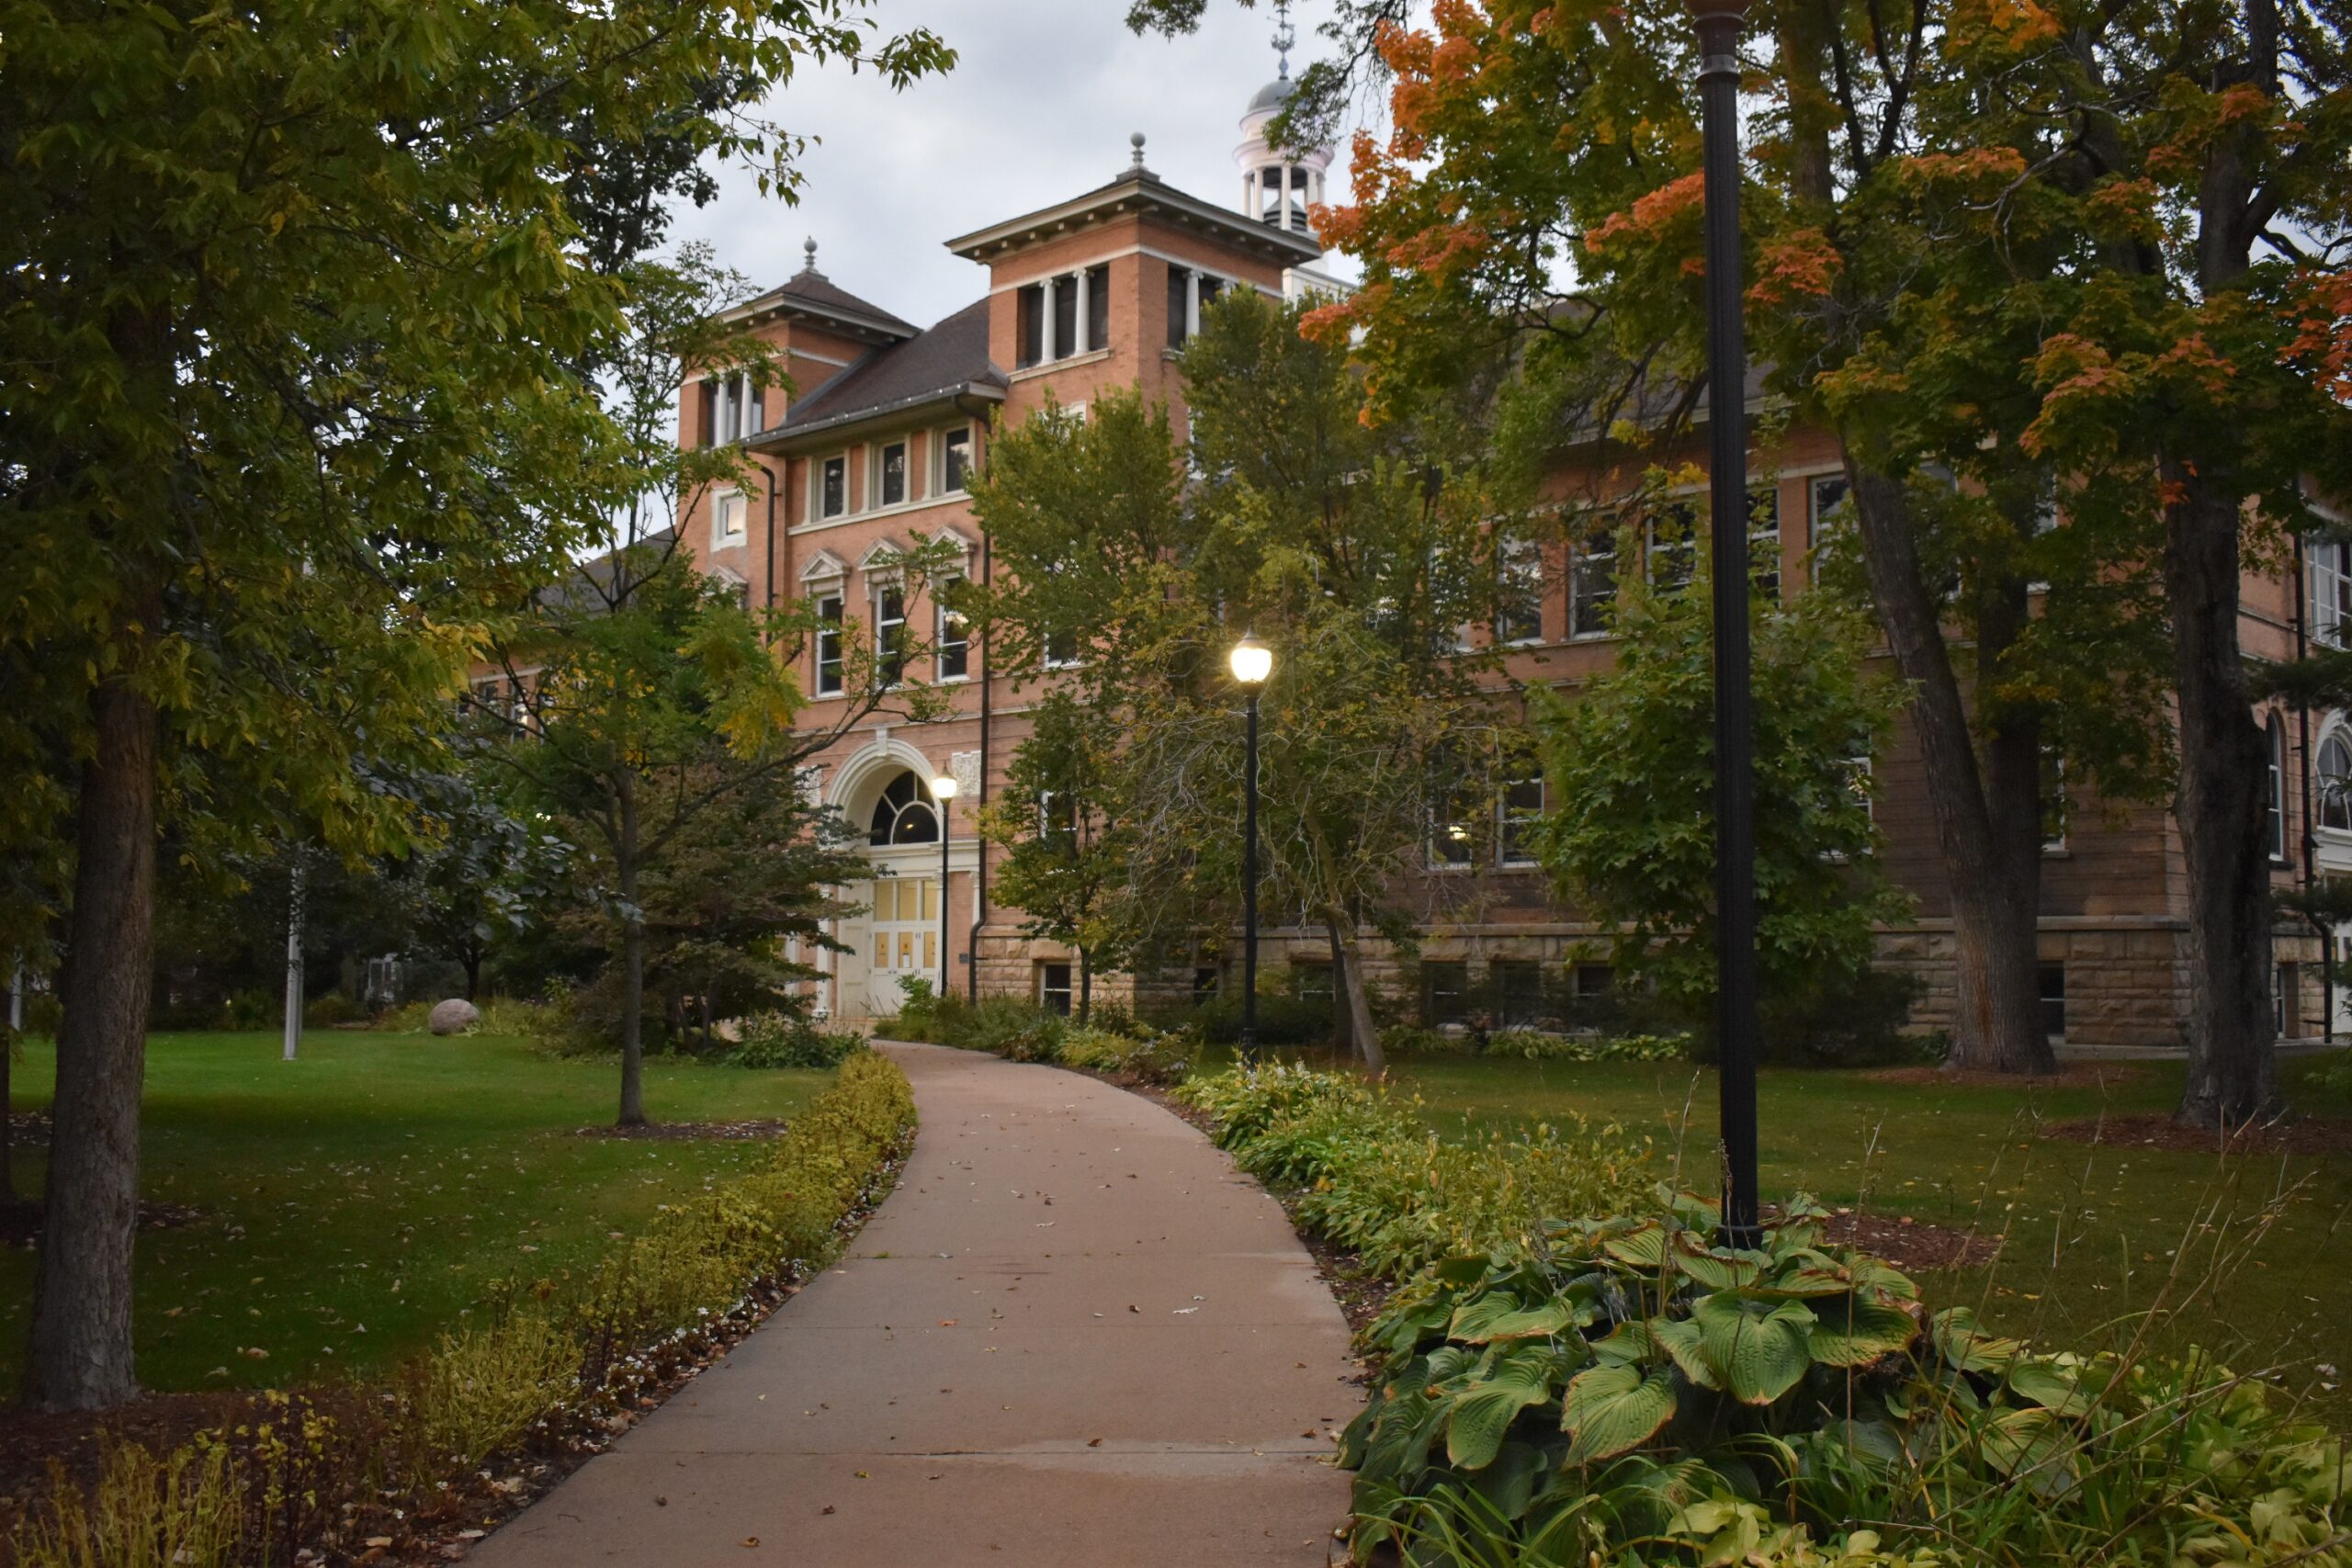 Old Main on the campus of the University of Wisconsin-Stevens Point